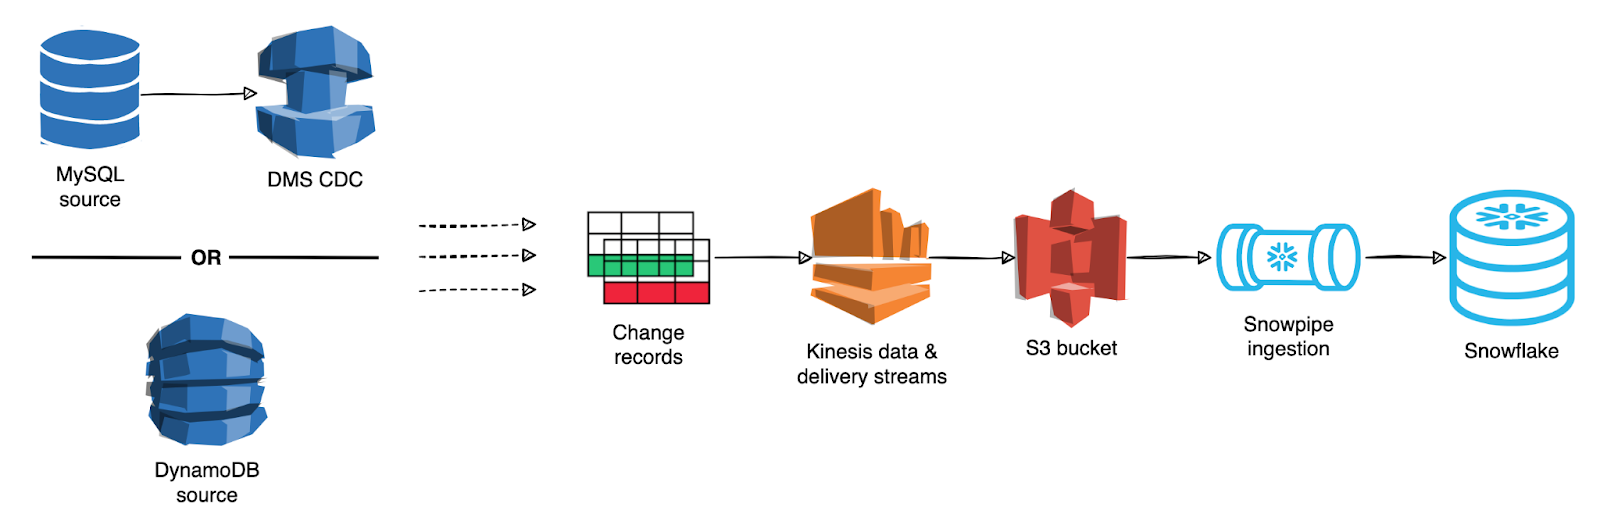 CDC replication and ingestion architecture for MySQL and DynamoDB. Changes in records come from various data sources, and are delivered to an S3 bucket via Kinesis data and delivery streams. The changes are ingested via Snowpipe into the warehouse.